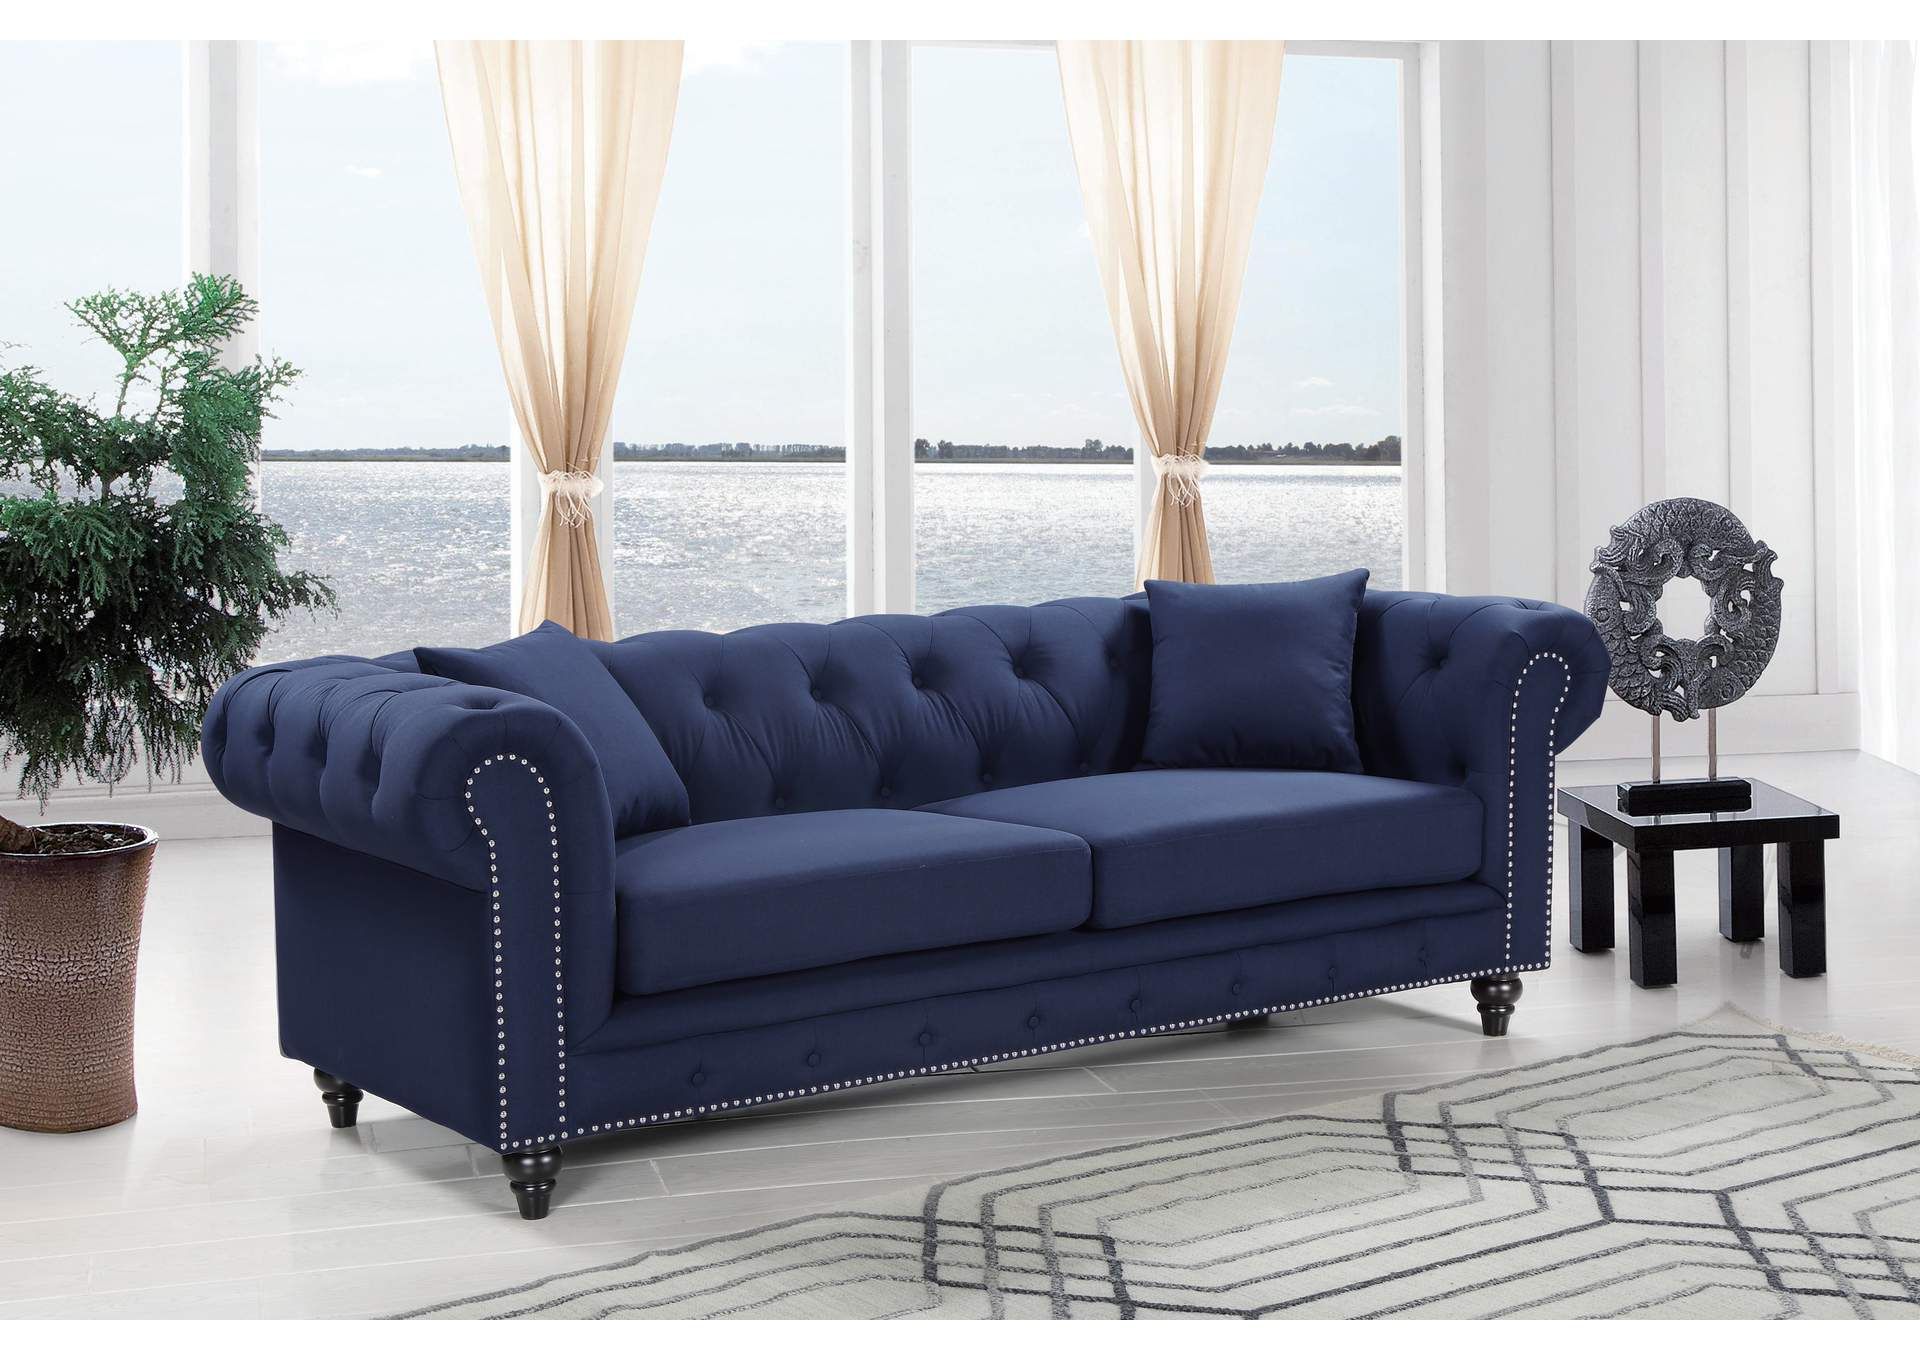 Chesterfield Navy Linen Sofa Best Buy Furniture And Mattress In Navy Linen Coil Sofas (View 5 of 20)